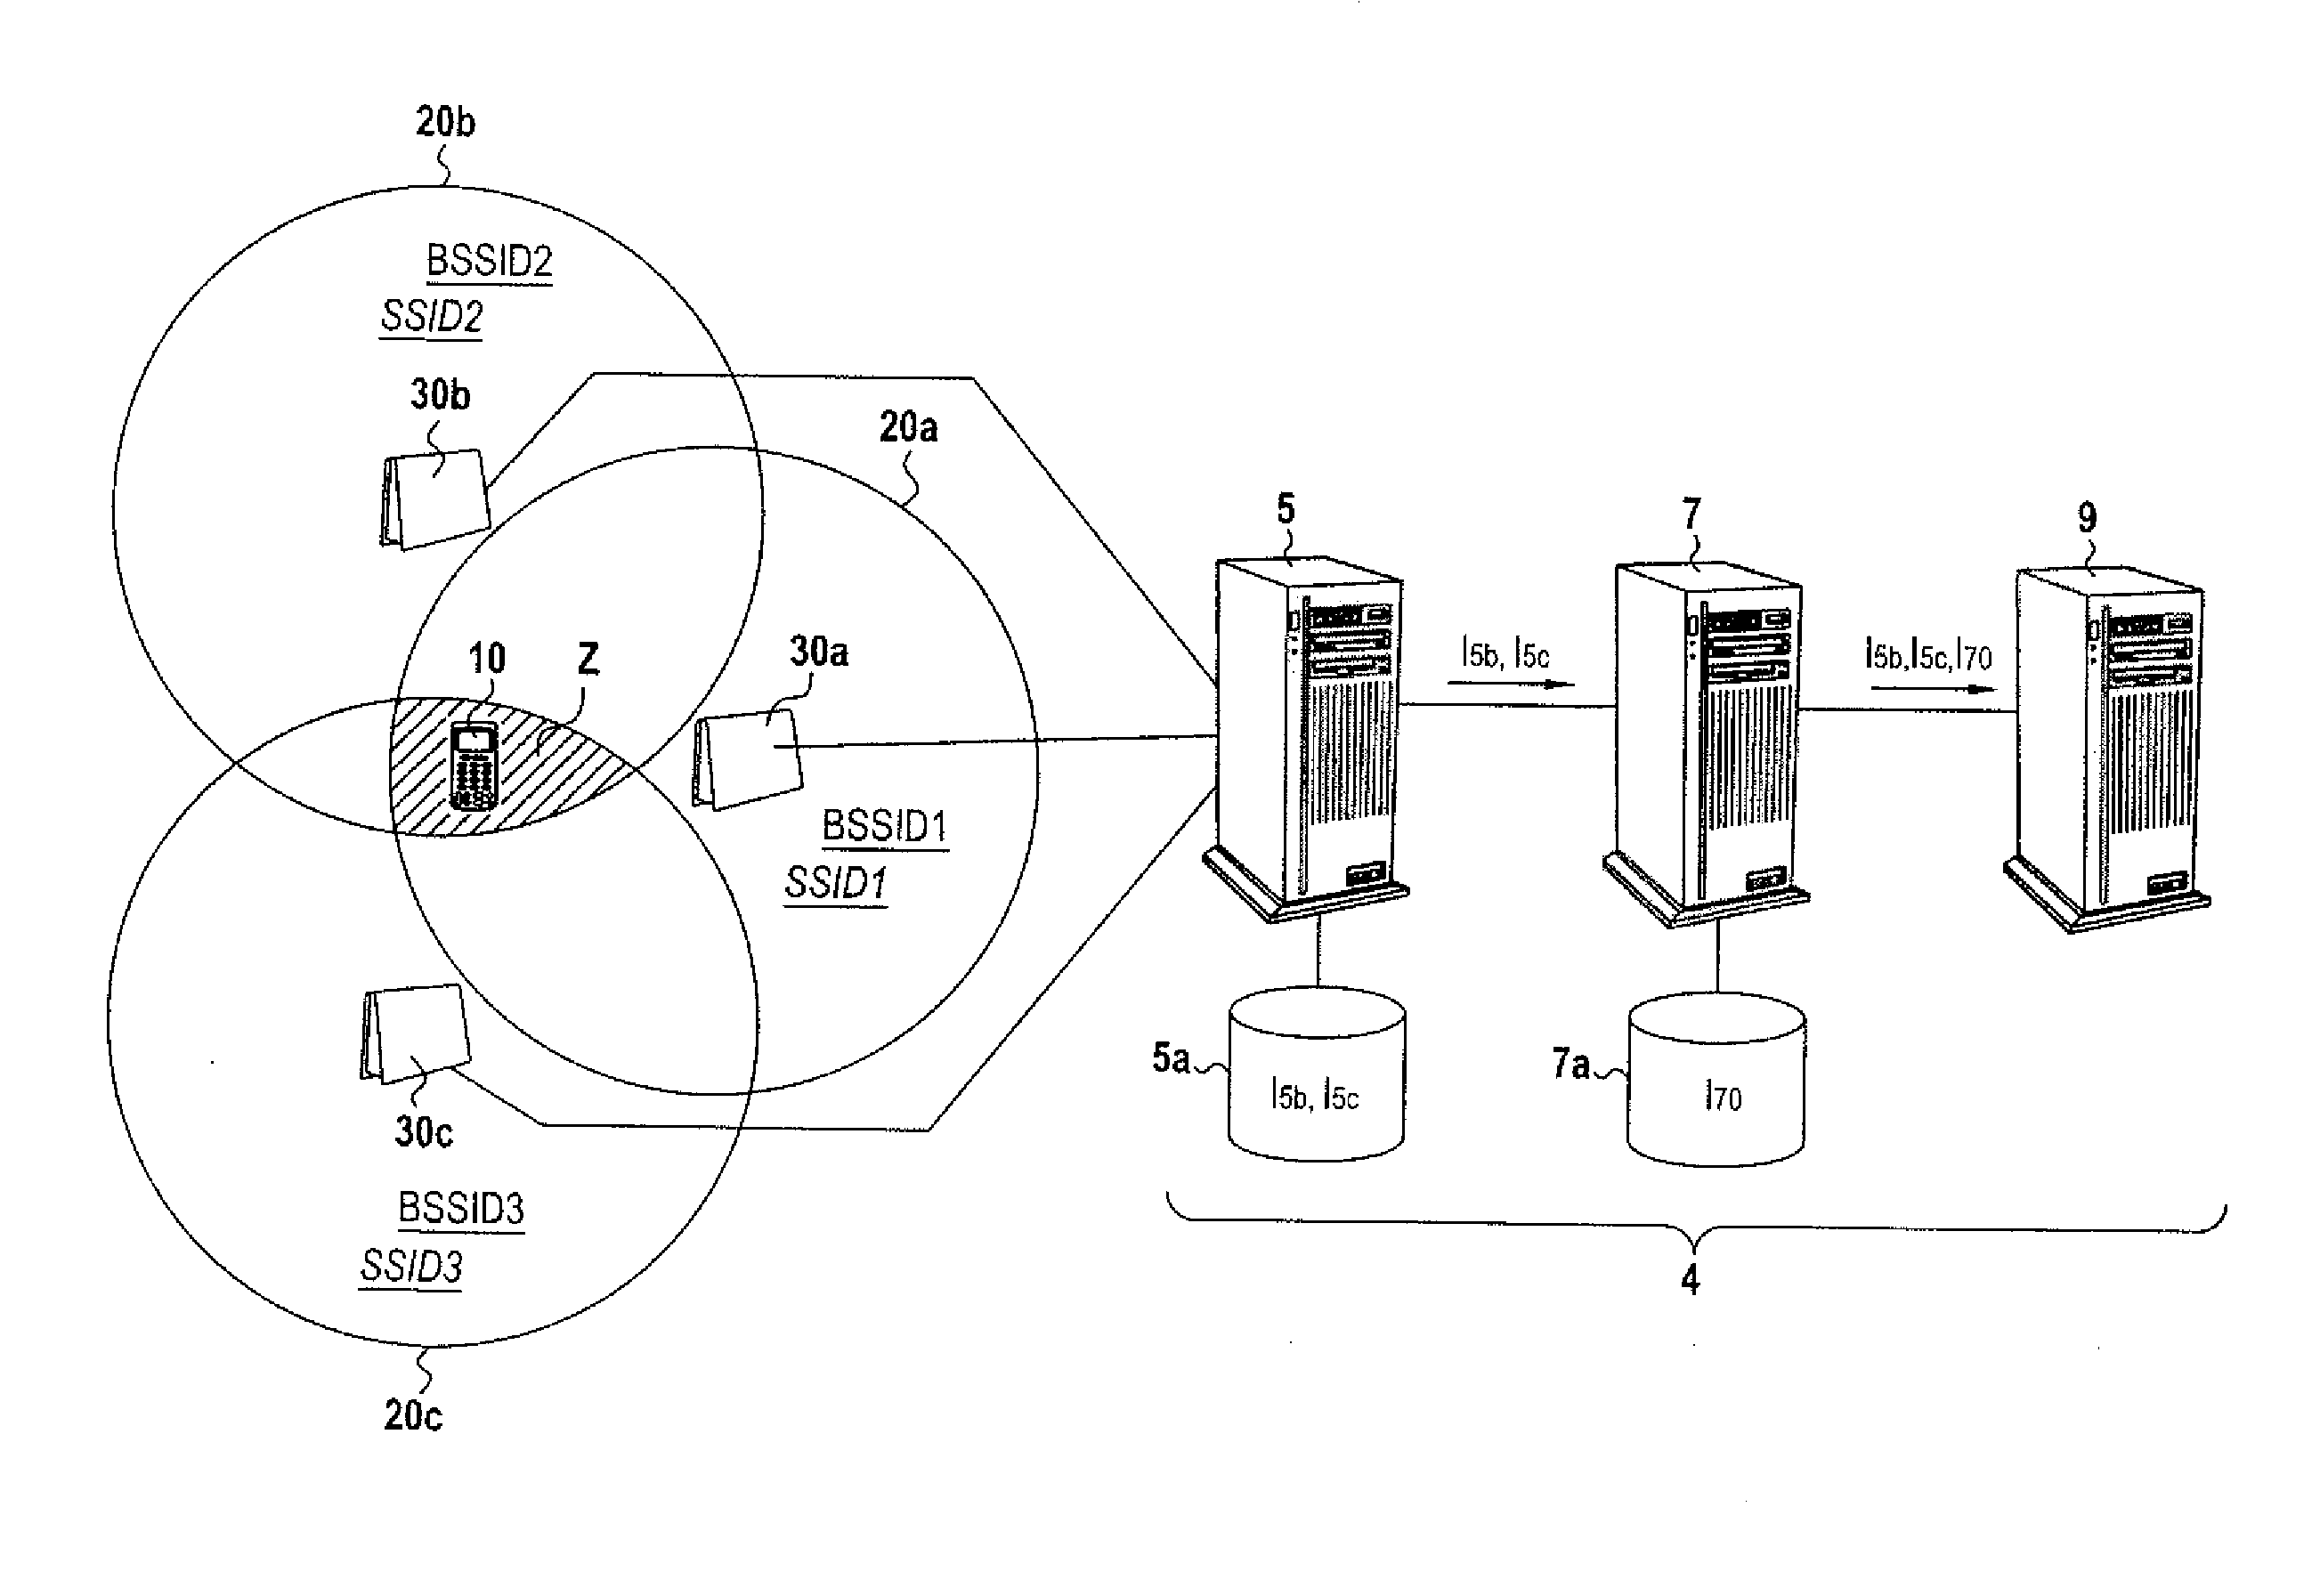 Method for Obtaining Information from a Local Terminal Environment